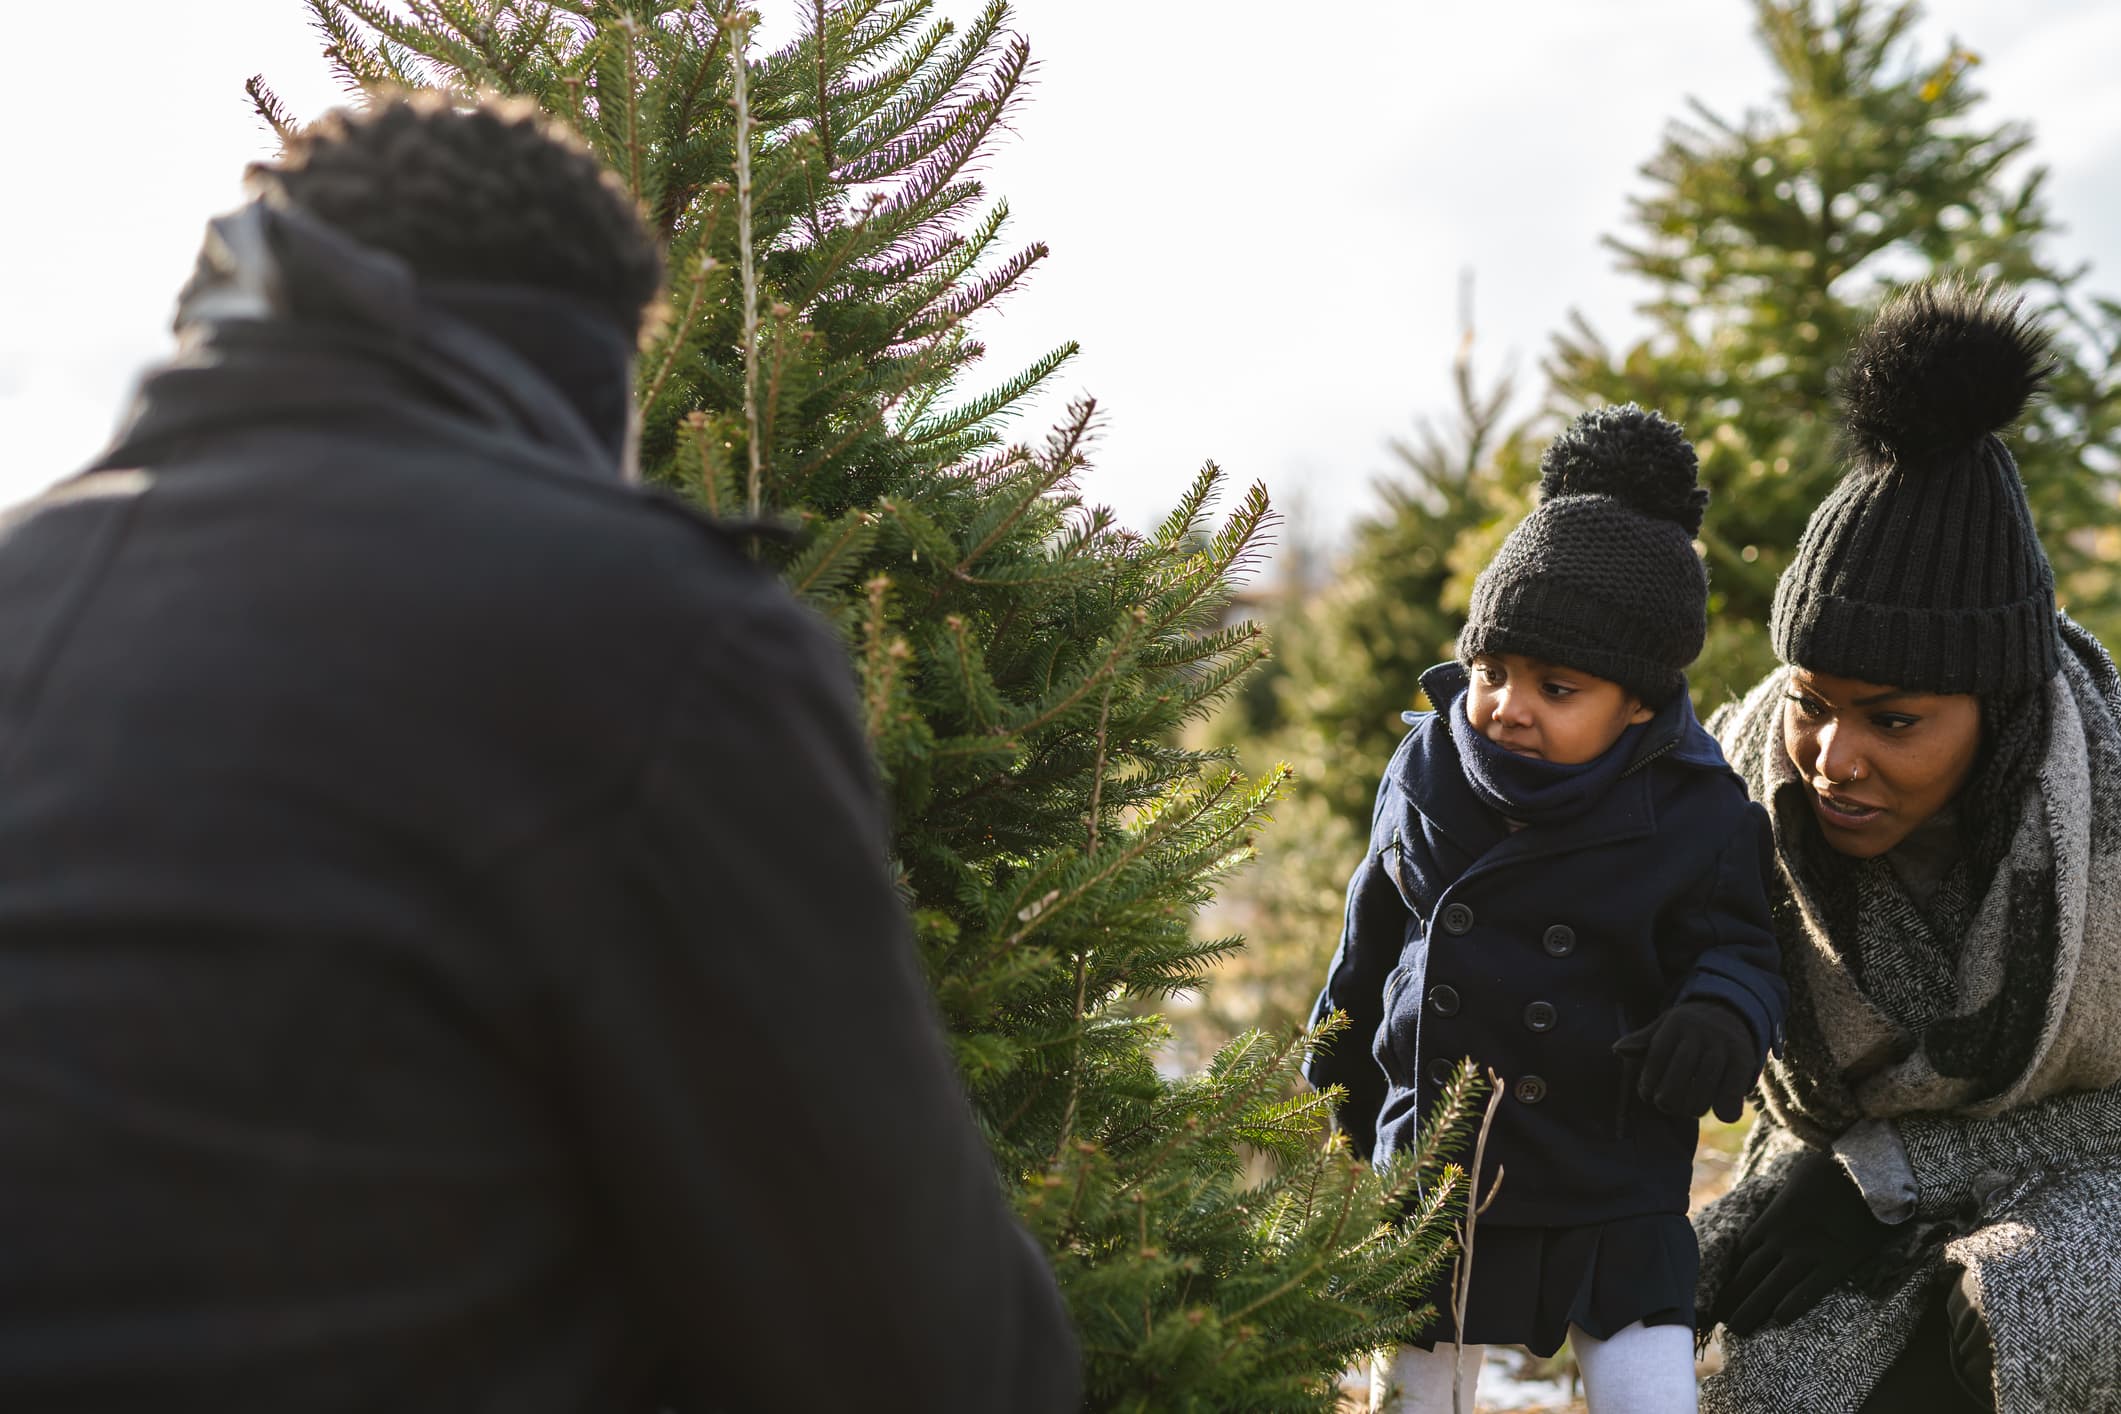 A beautiful family have decided on the perfect Christmas tree. They are at a tree farm and all wearing warm winter clothes.